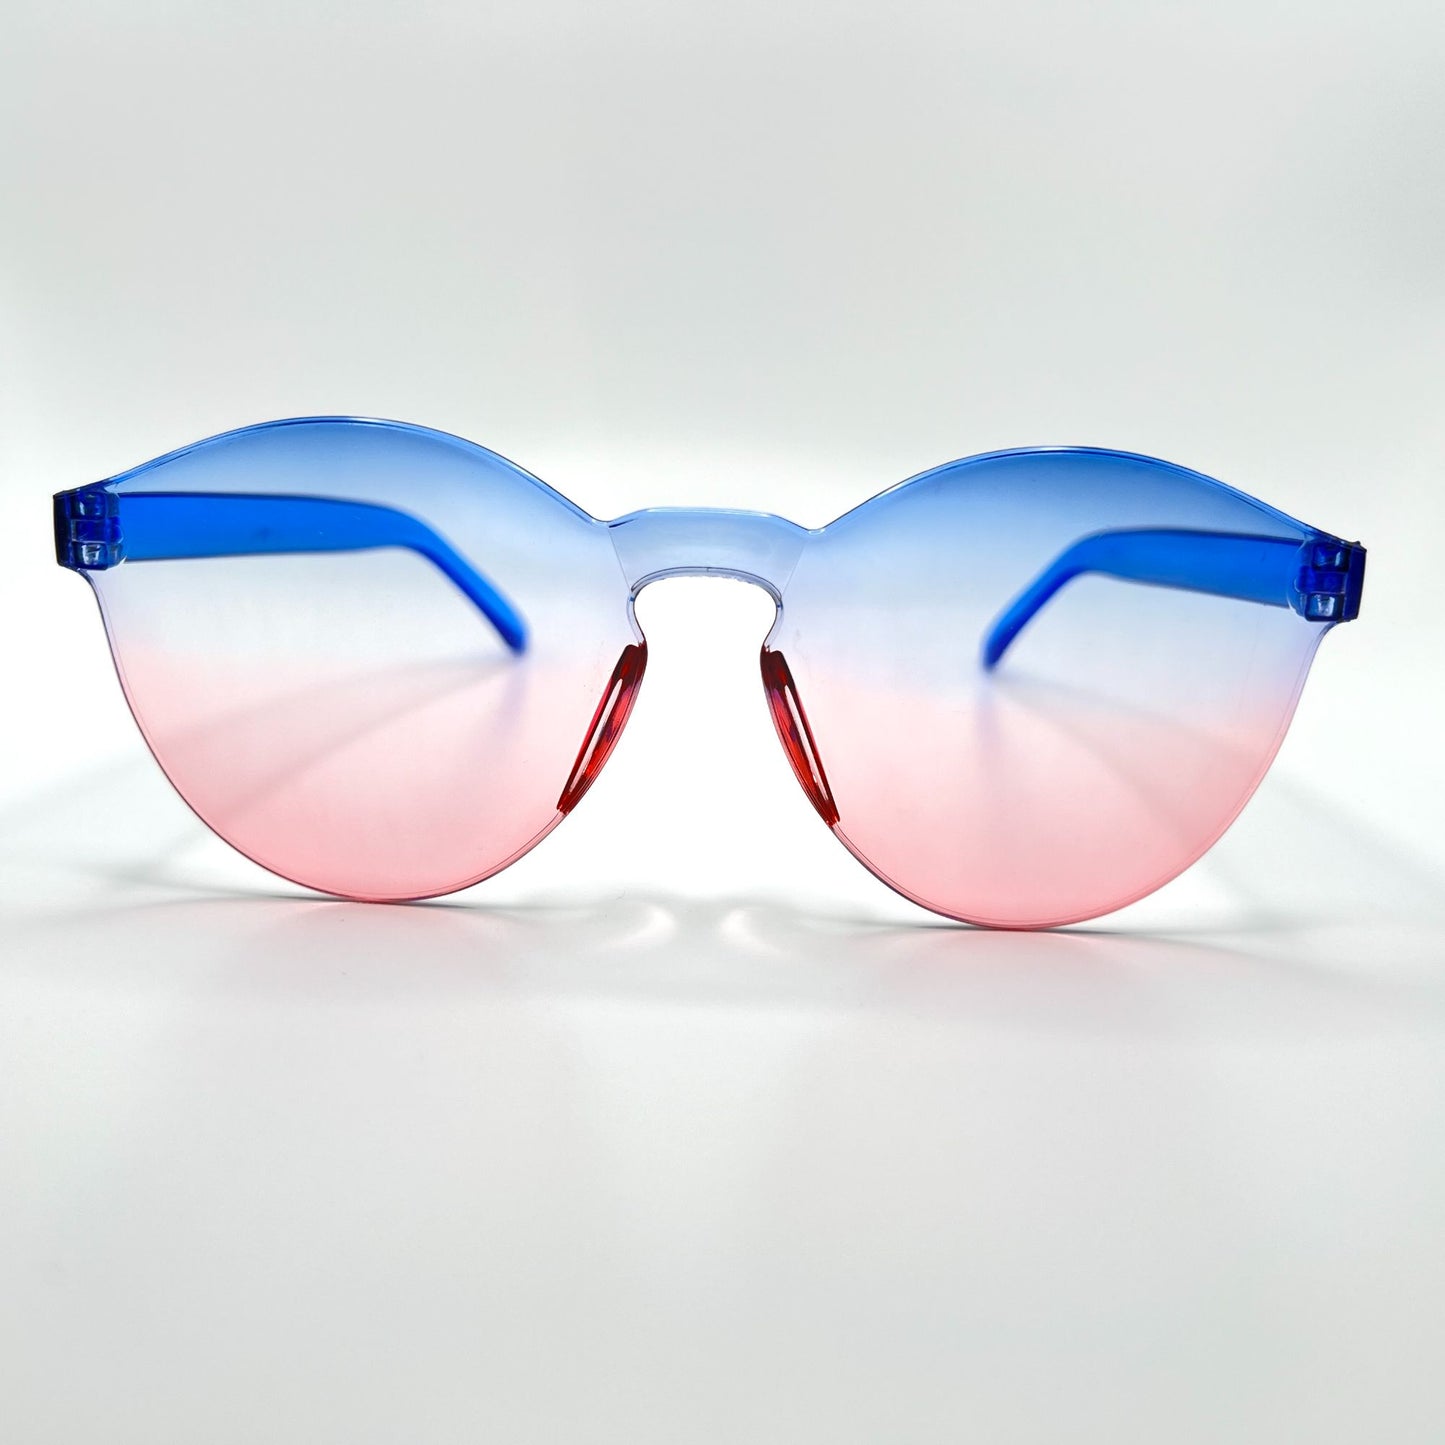 Color Pop Festival Shades for Men and Women